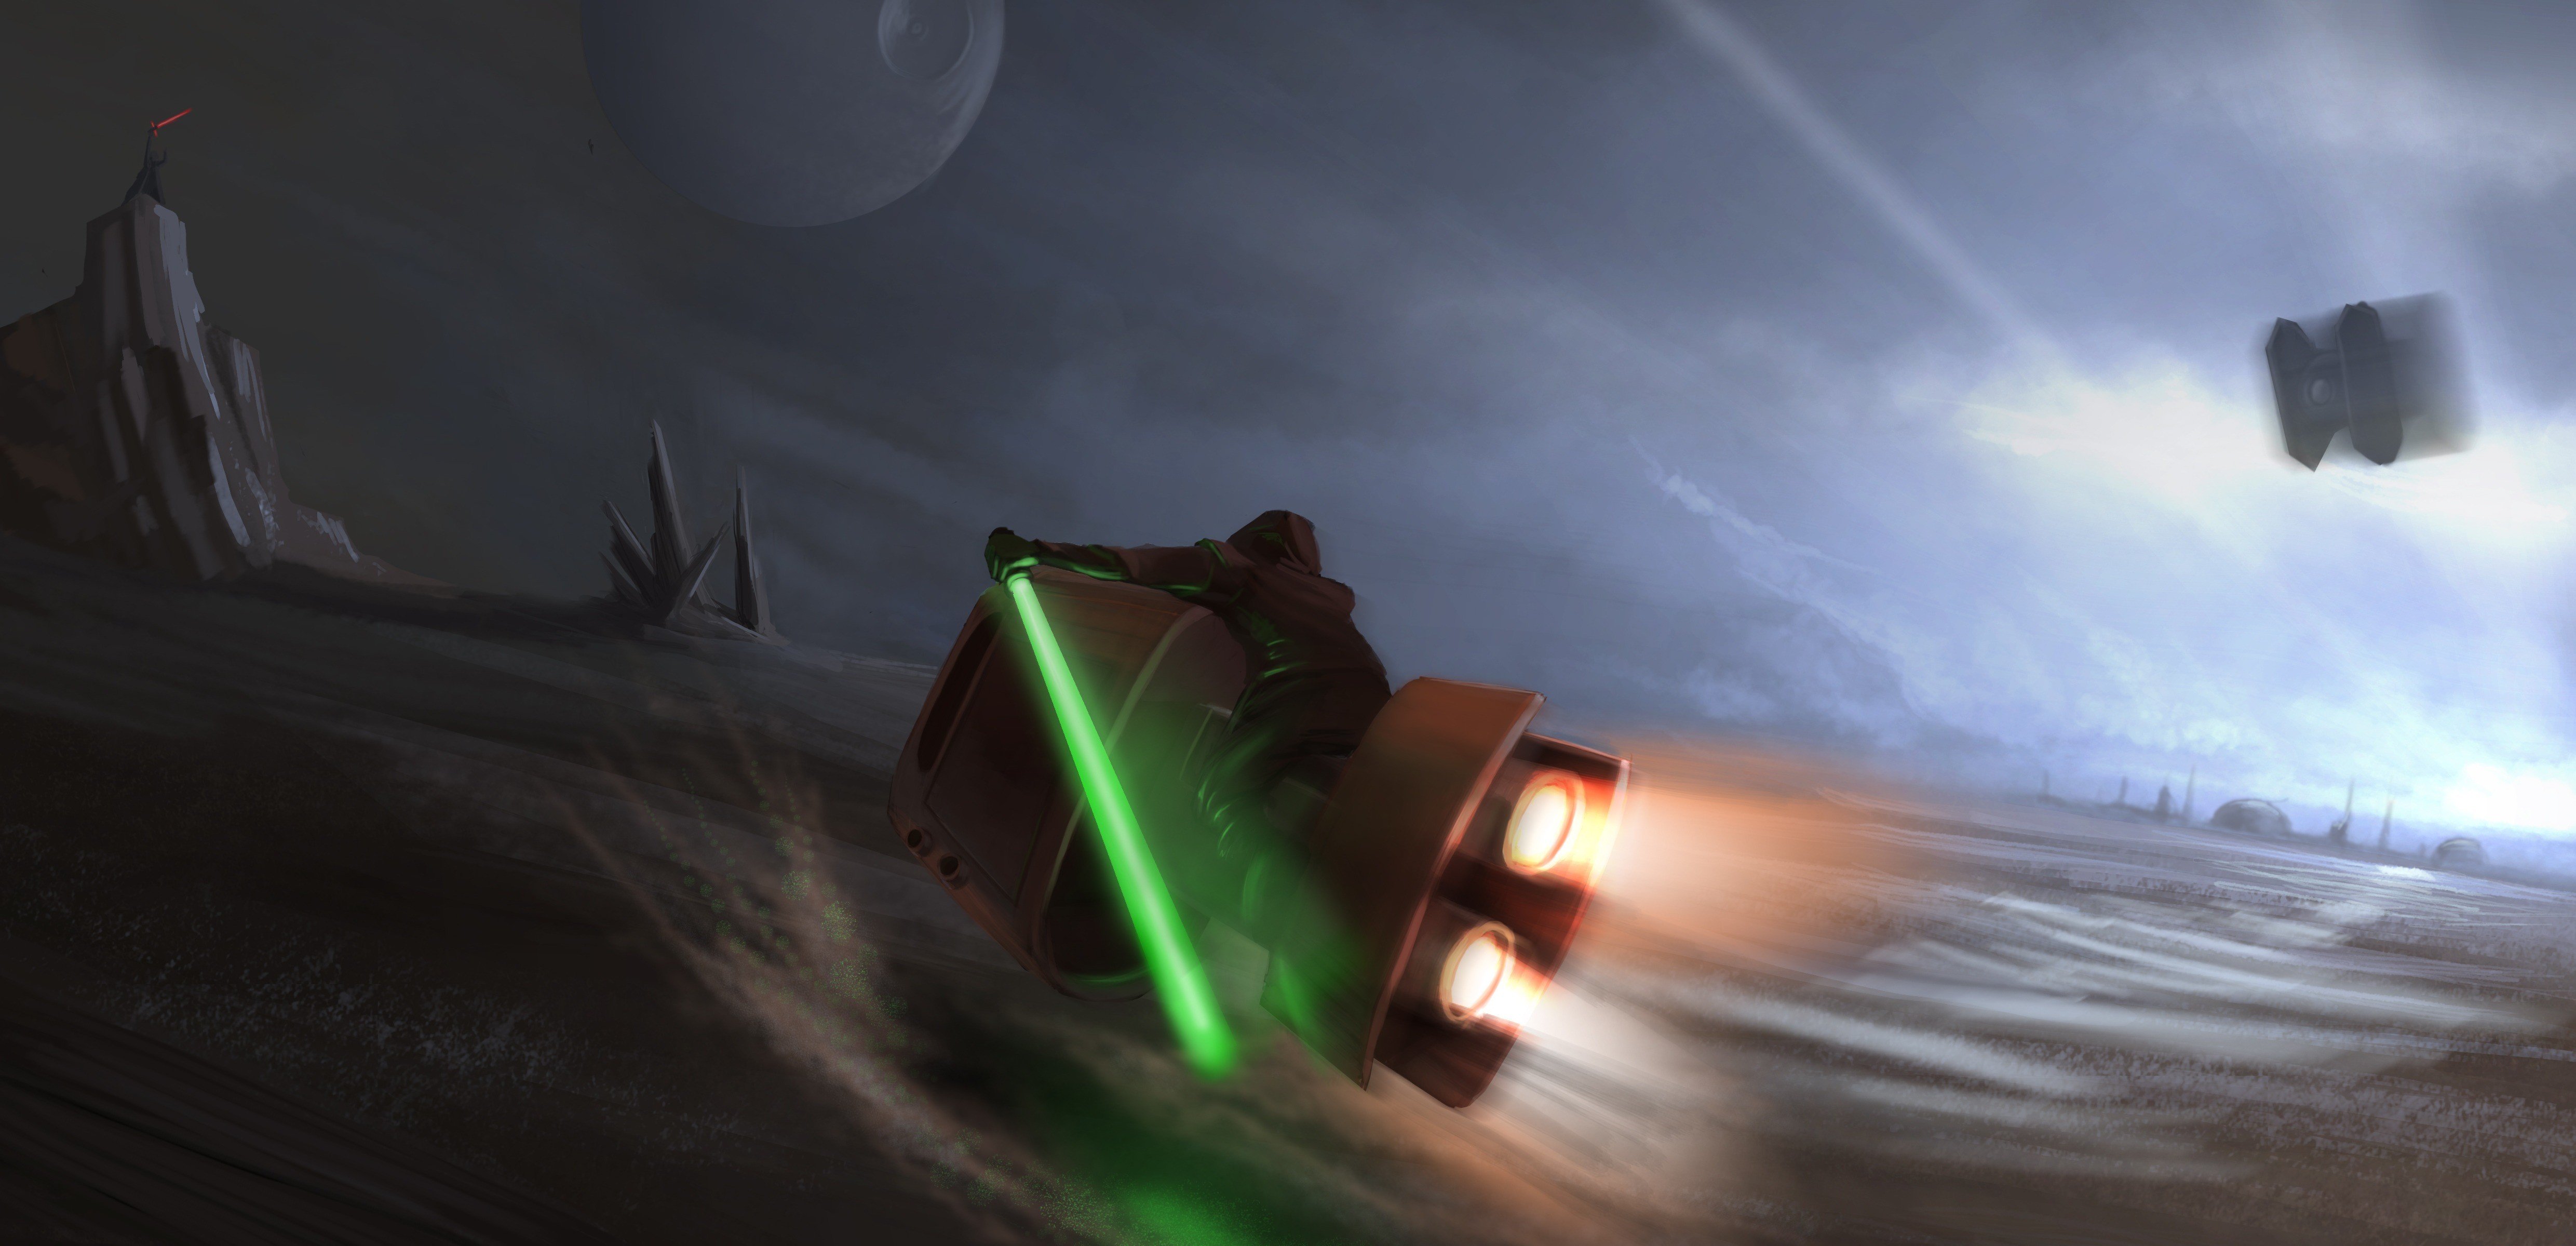  Episode VII   The Force Awakens wallpaper 4961x2399 by wall pixnet